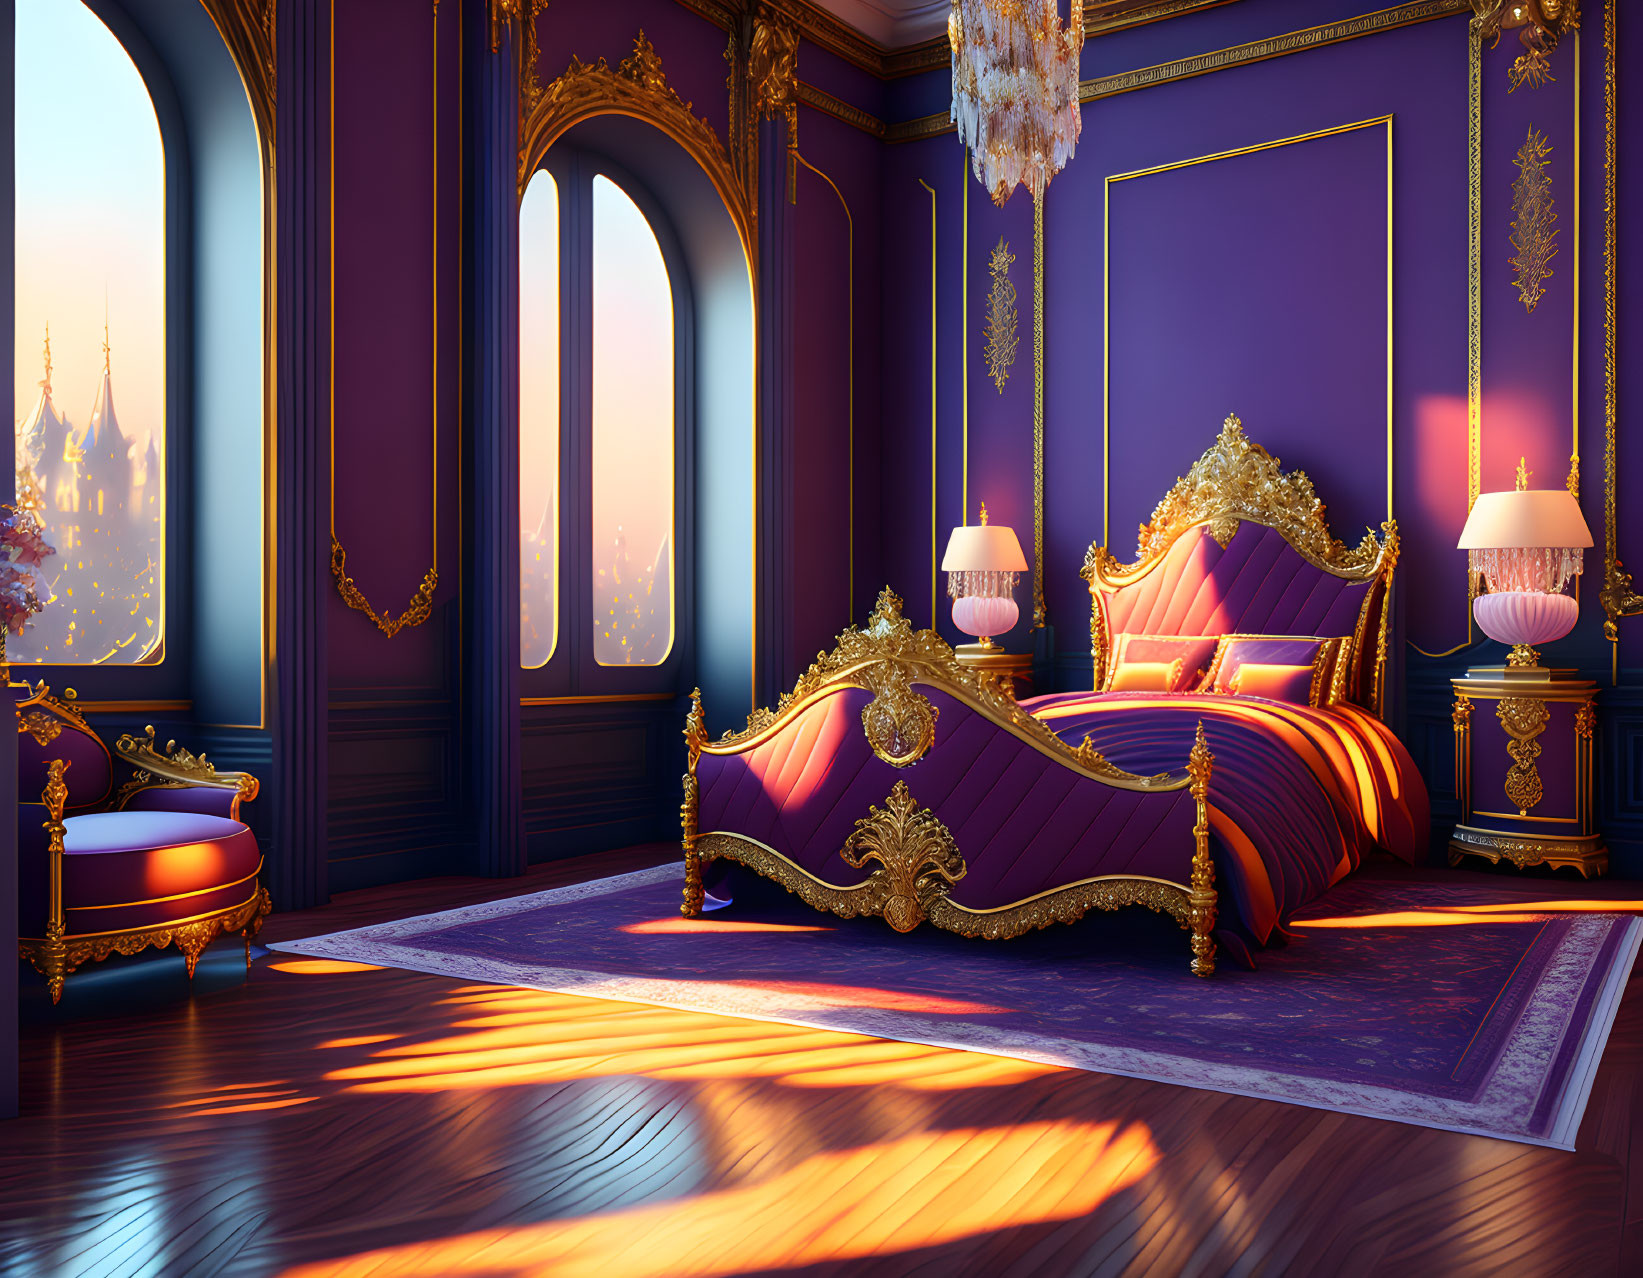 Luxurious Purple-Gold Bed in Opulent Bedroom with Castle View